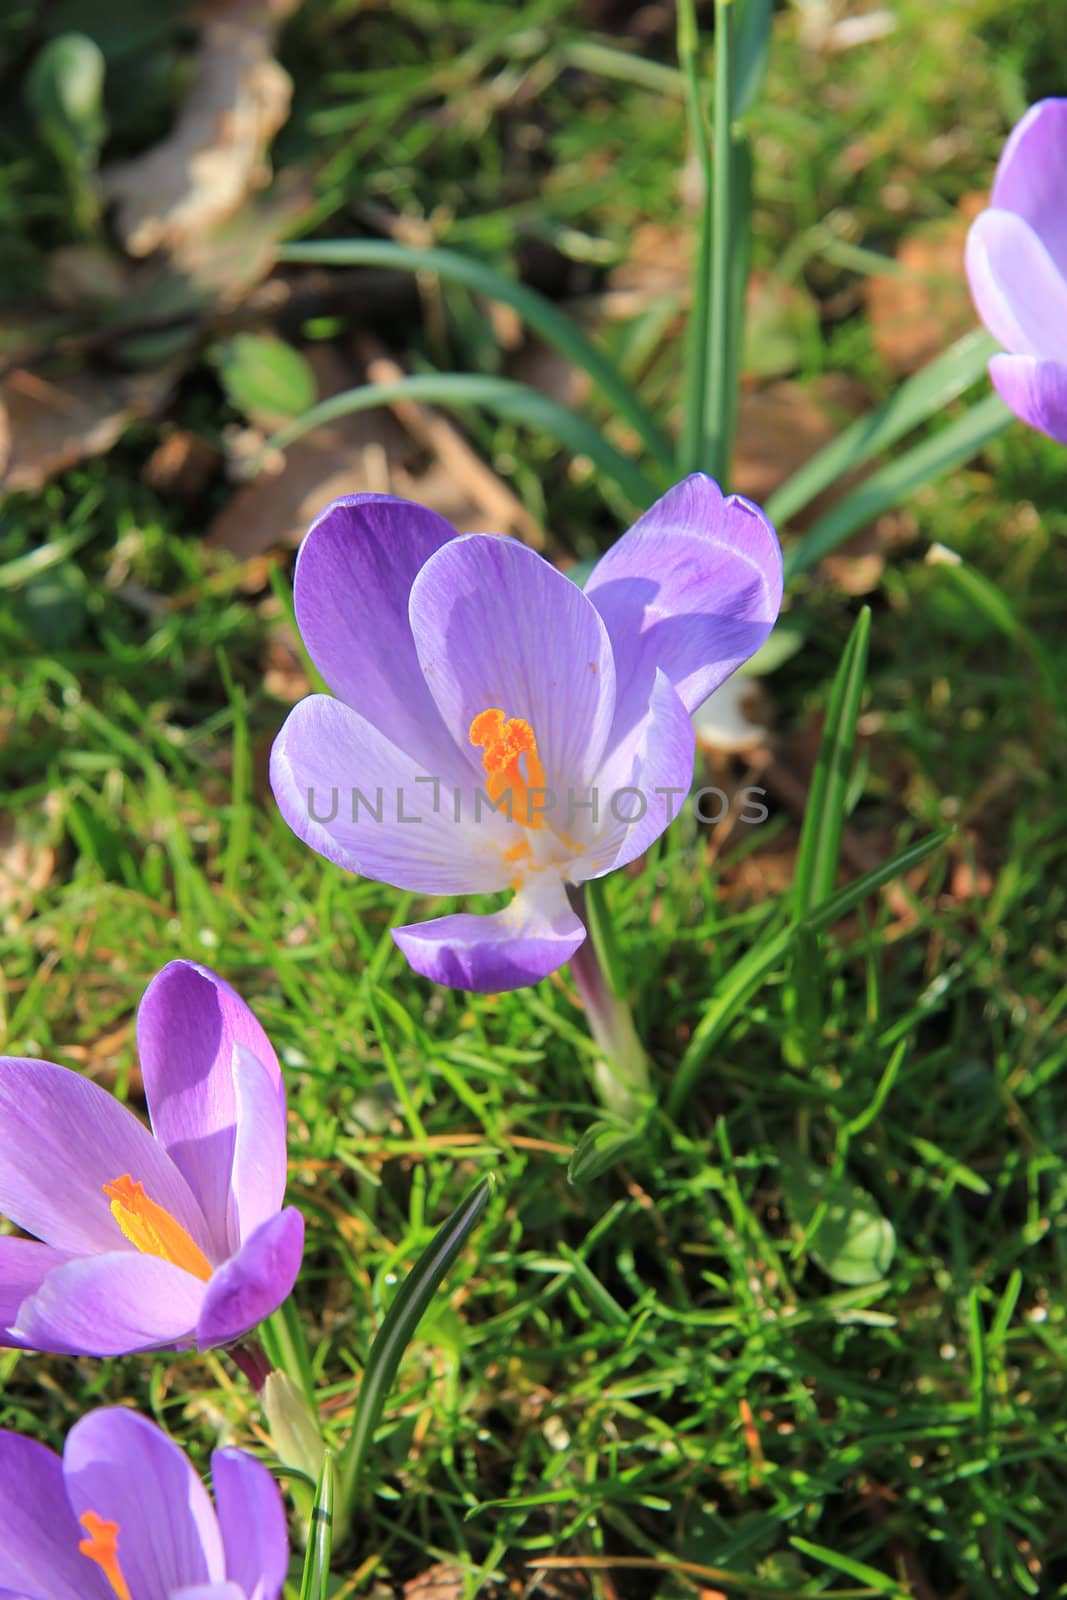 A couple of crocuses in the early spring sun